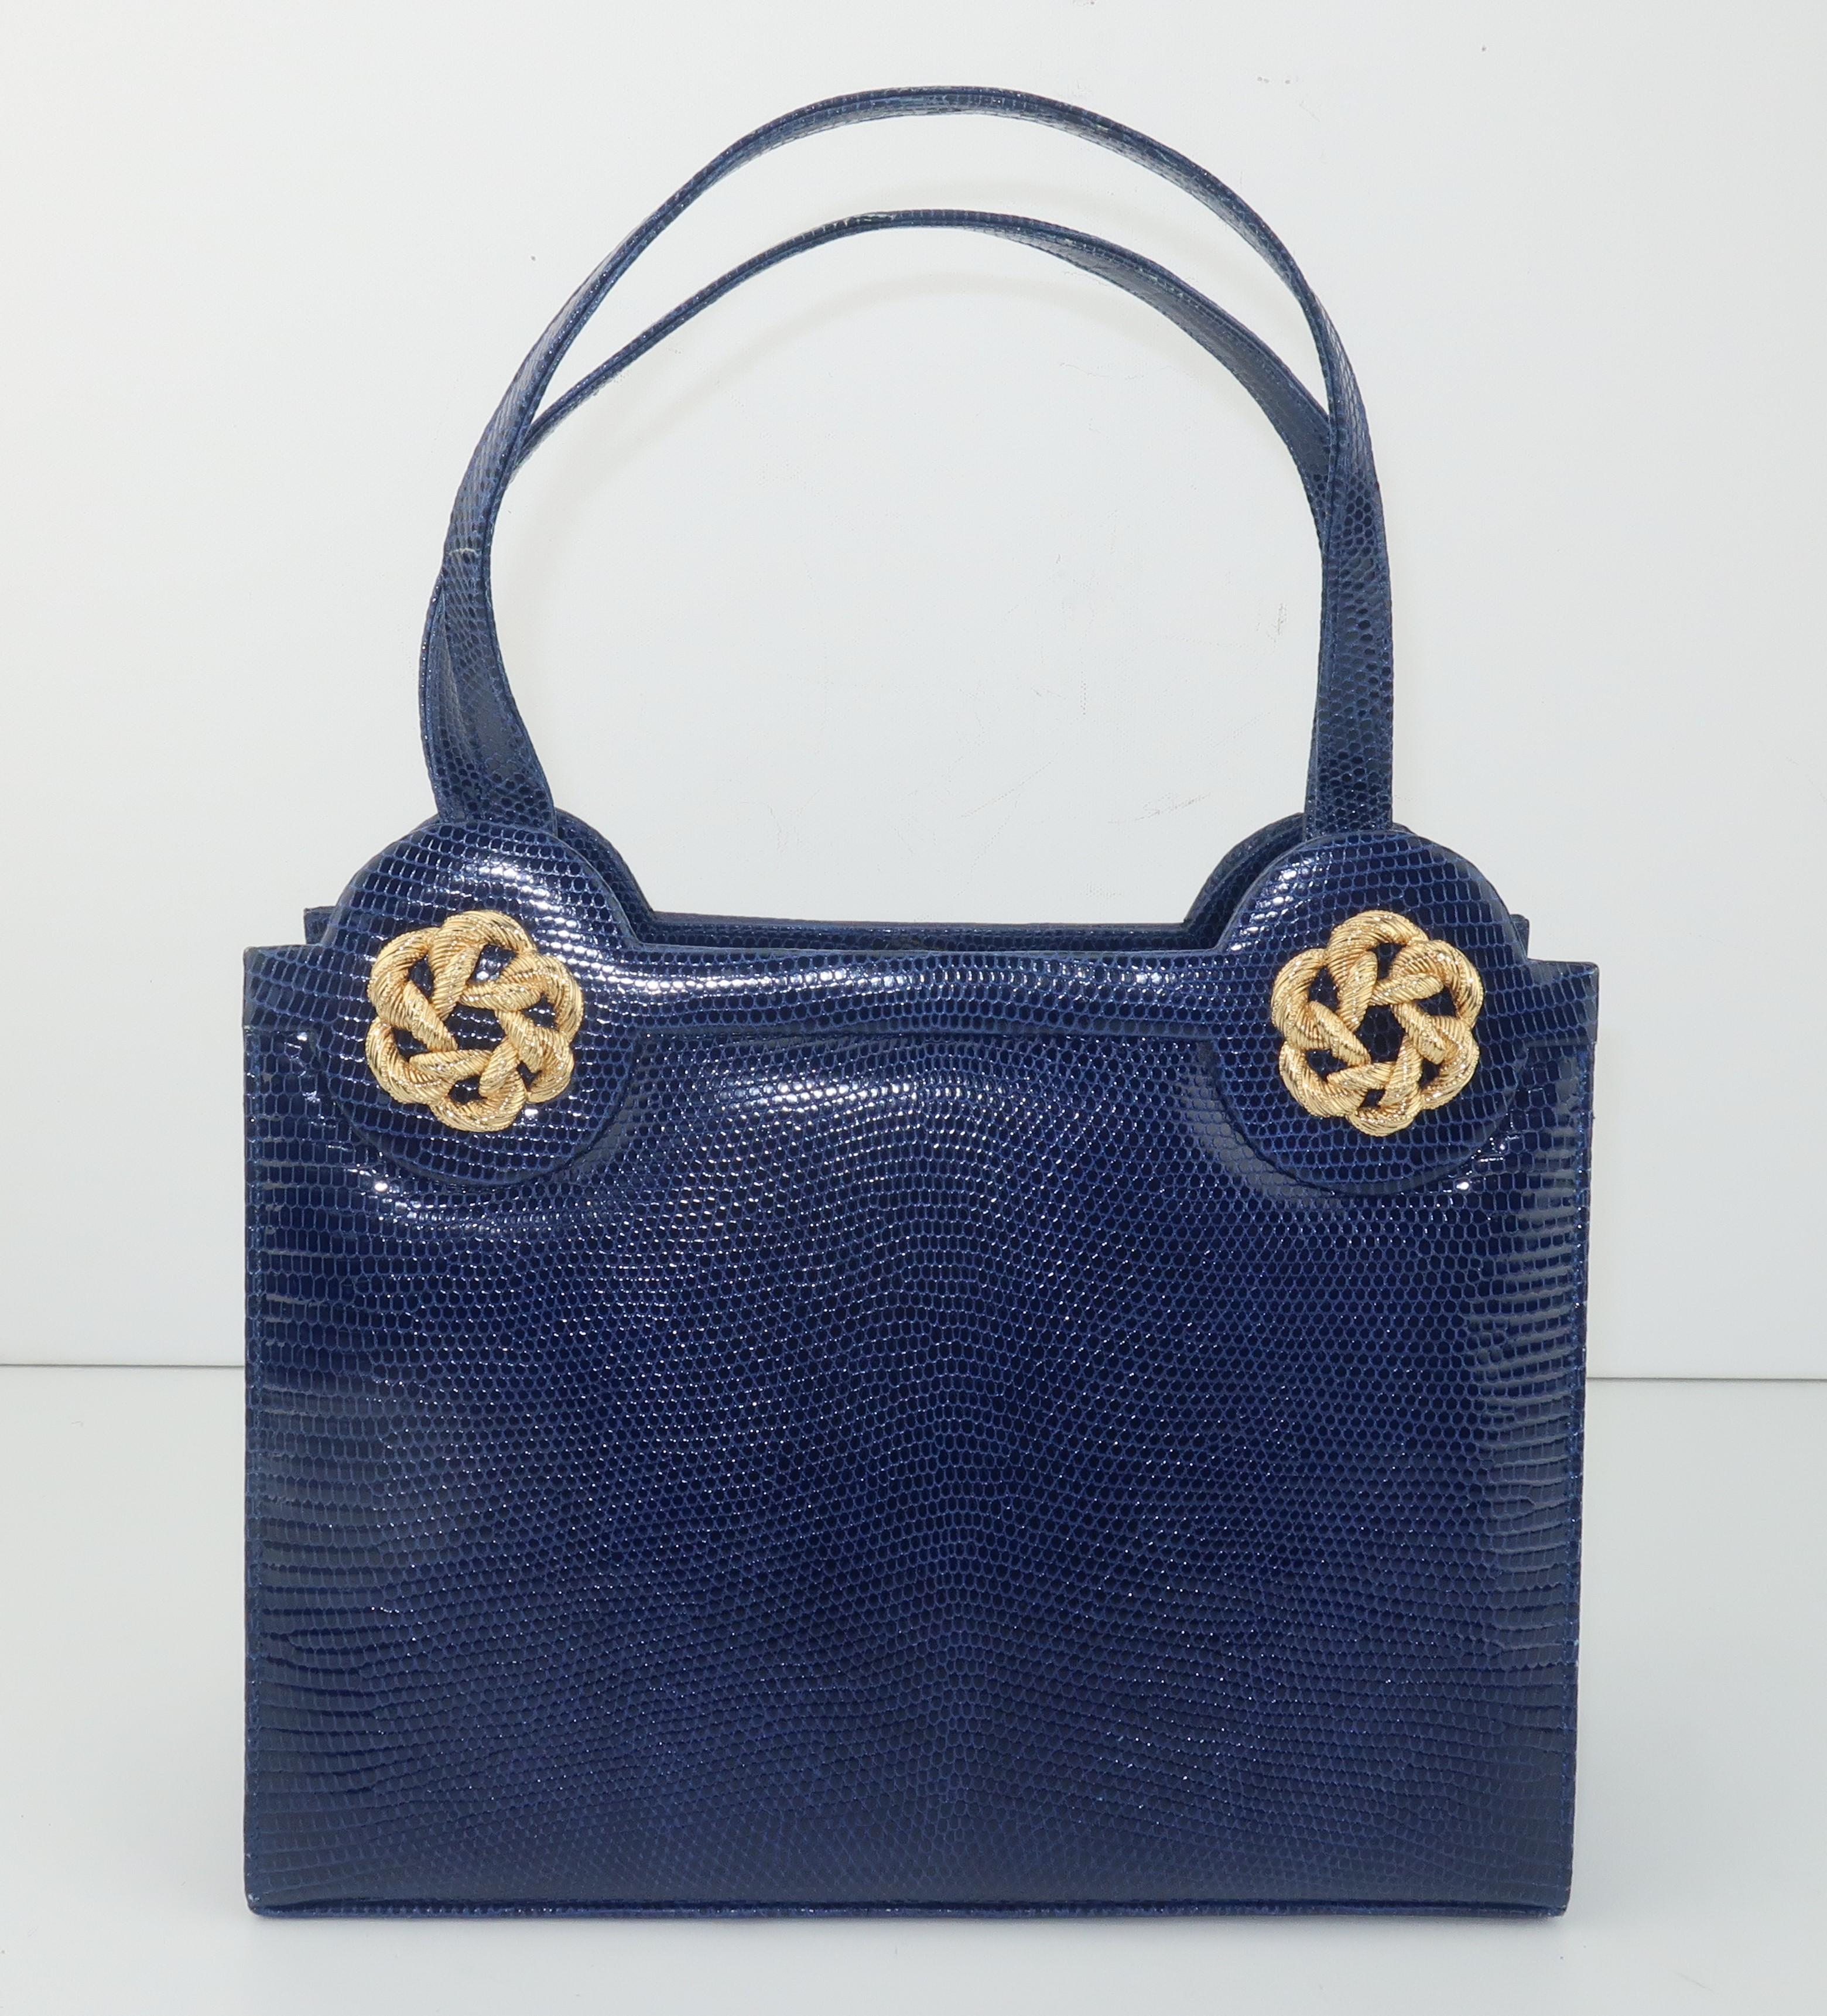 It's a Schaak attack!  A fabulous Martin Van Schaak royal blue lizard skin top handle handbag with gold 'braided' decoration is on the prowl just waiting to add a dash of vintage glamour to your wardrobe.  Mr. Van Schaak's handbag designs are truly